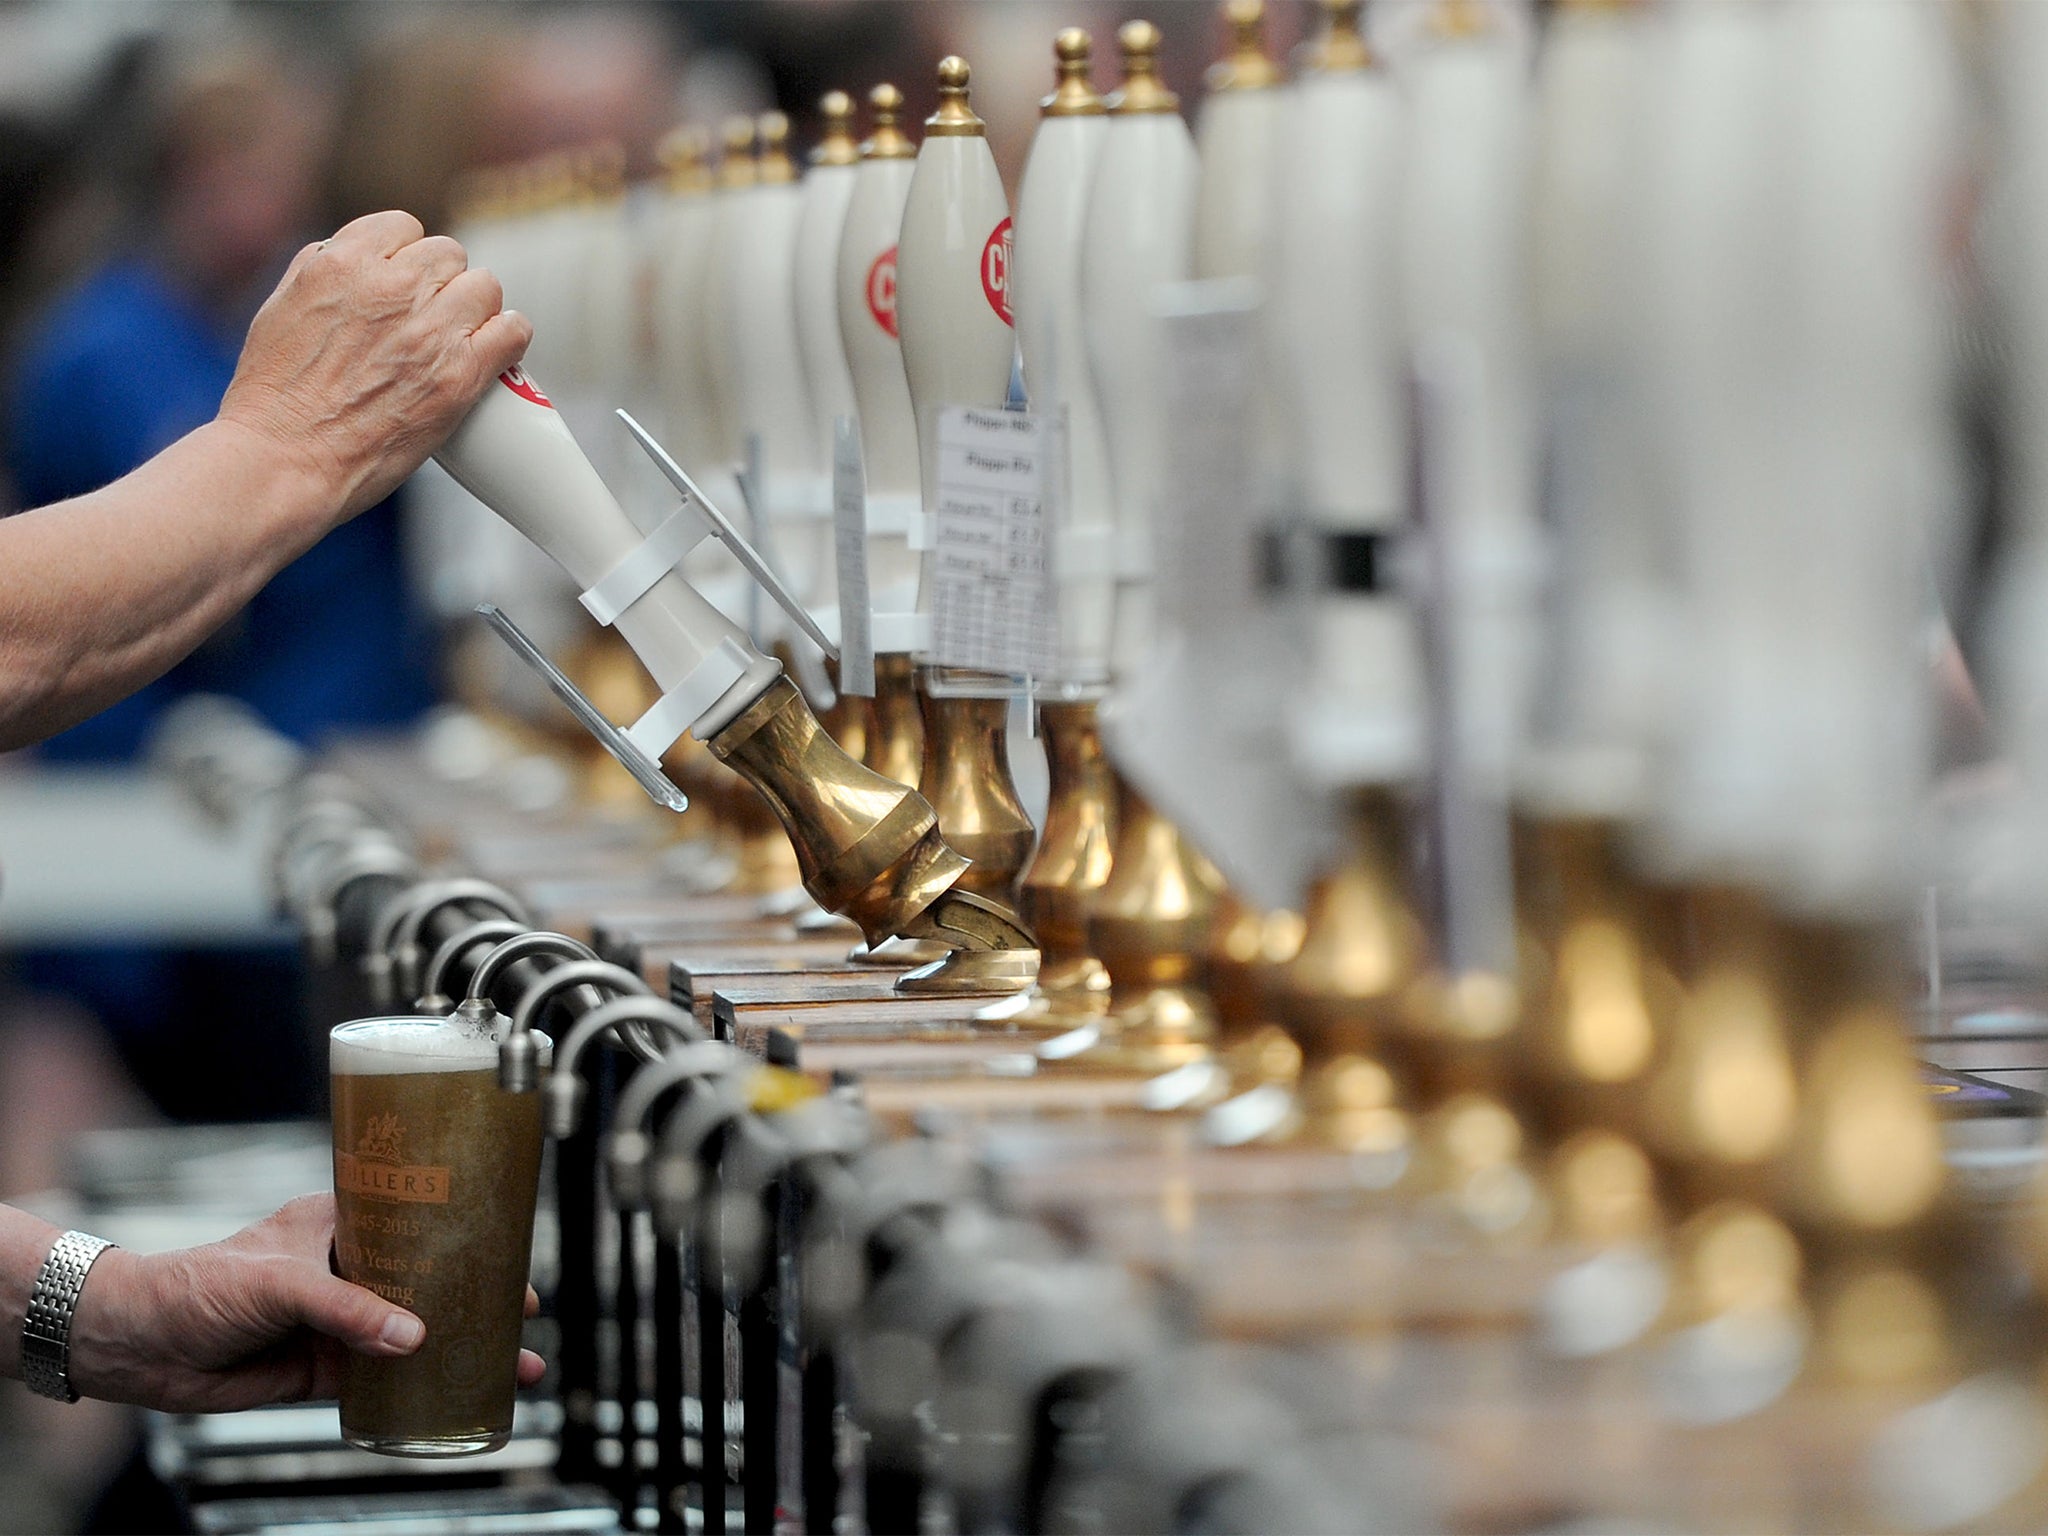 New proposals for the organisation to play a leading role in the provision of information, education and training to all those with an interest in beer, cider and perry of any type were passed by its members on Saturday